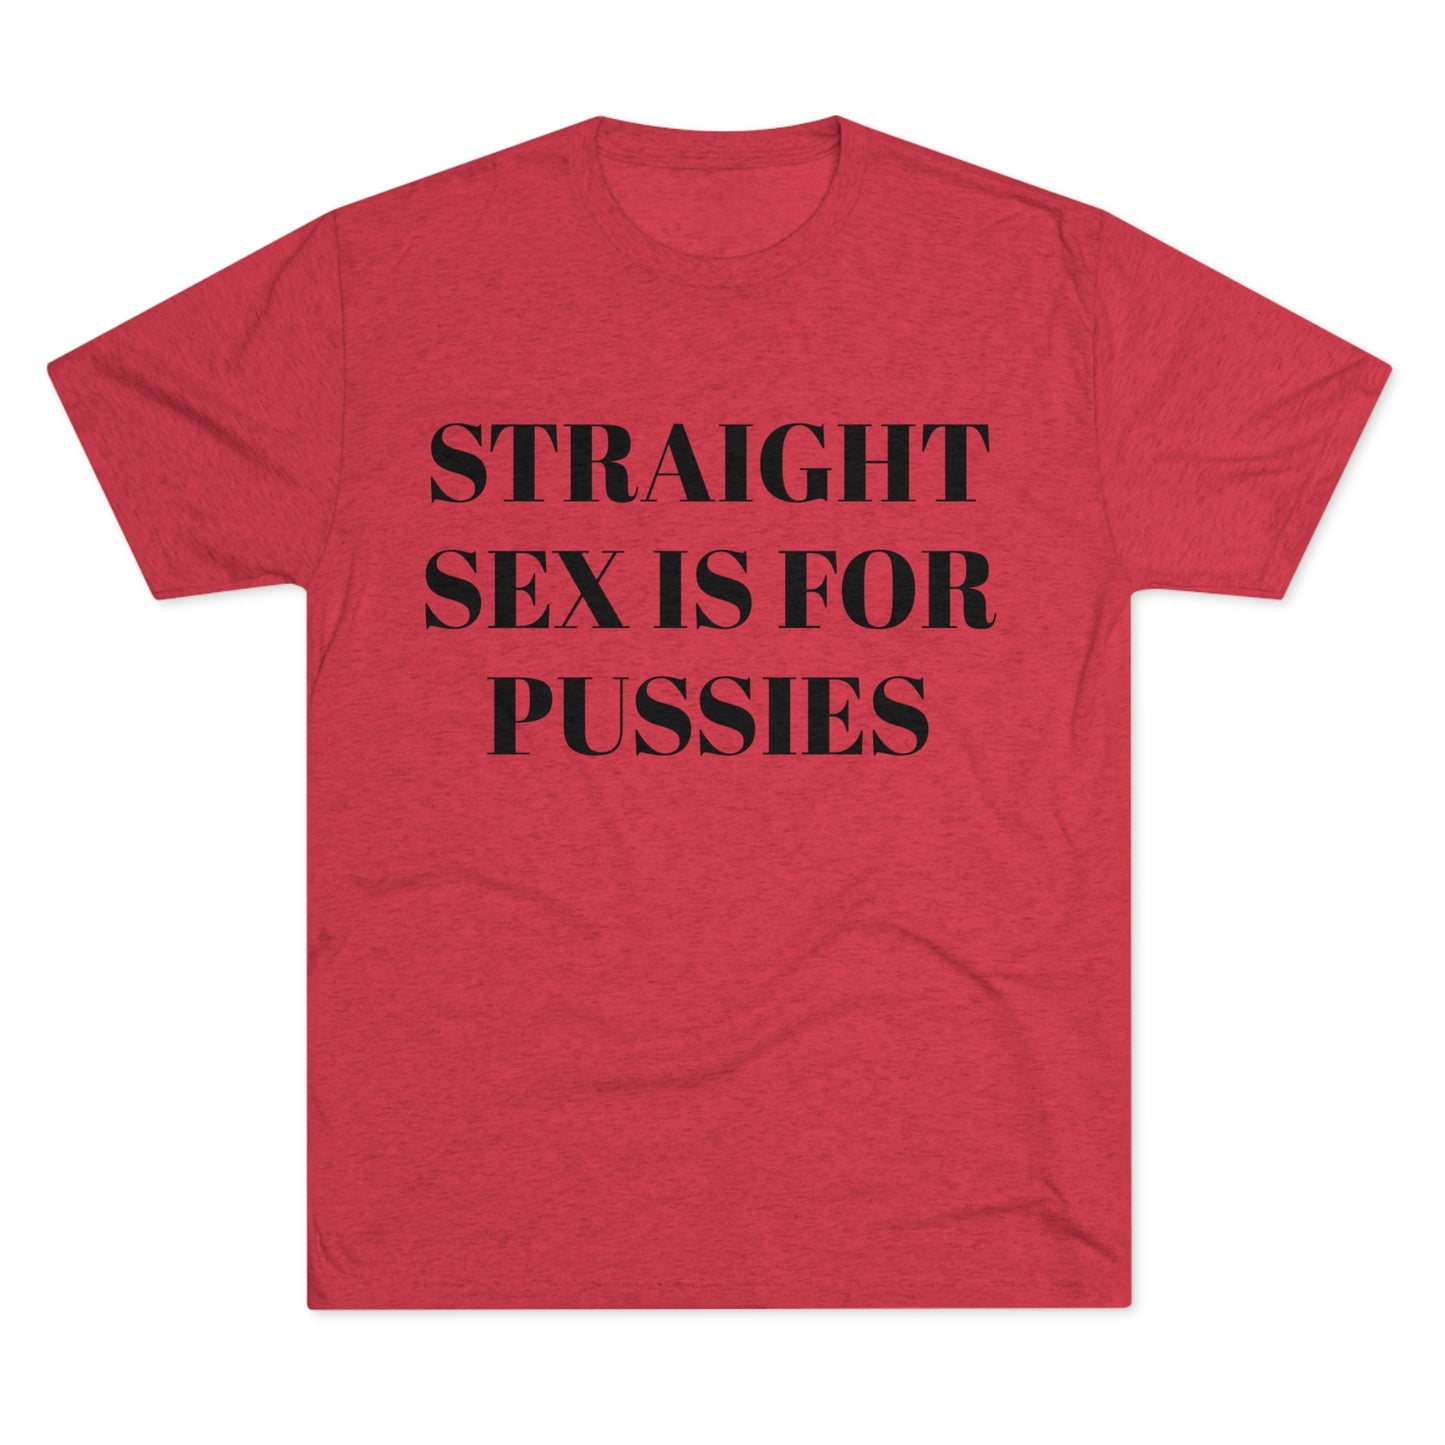 Straight Sex Is For Pussies - Unisex Tri-Blend Crew Tee